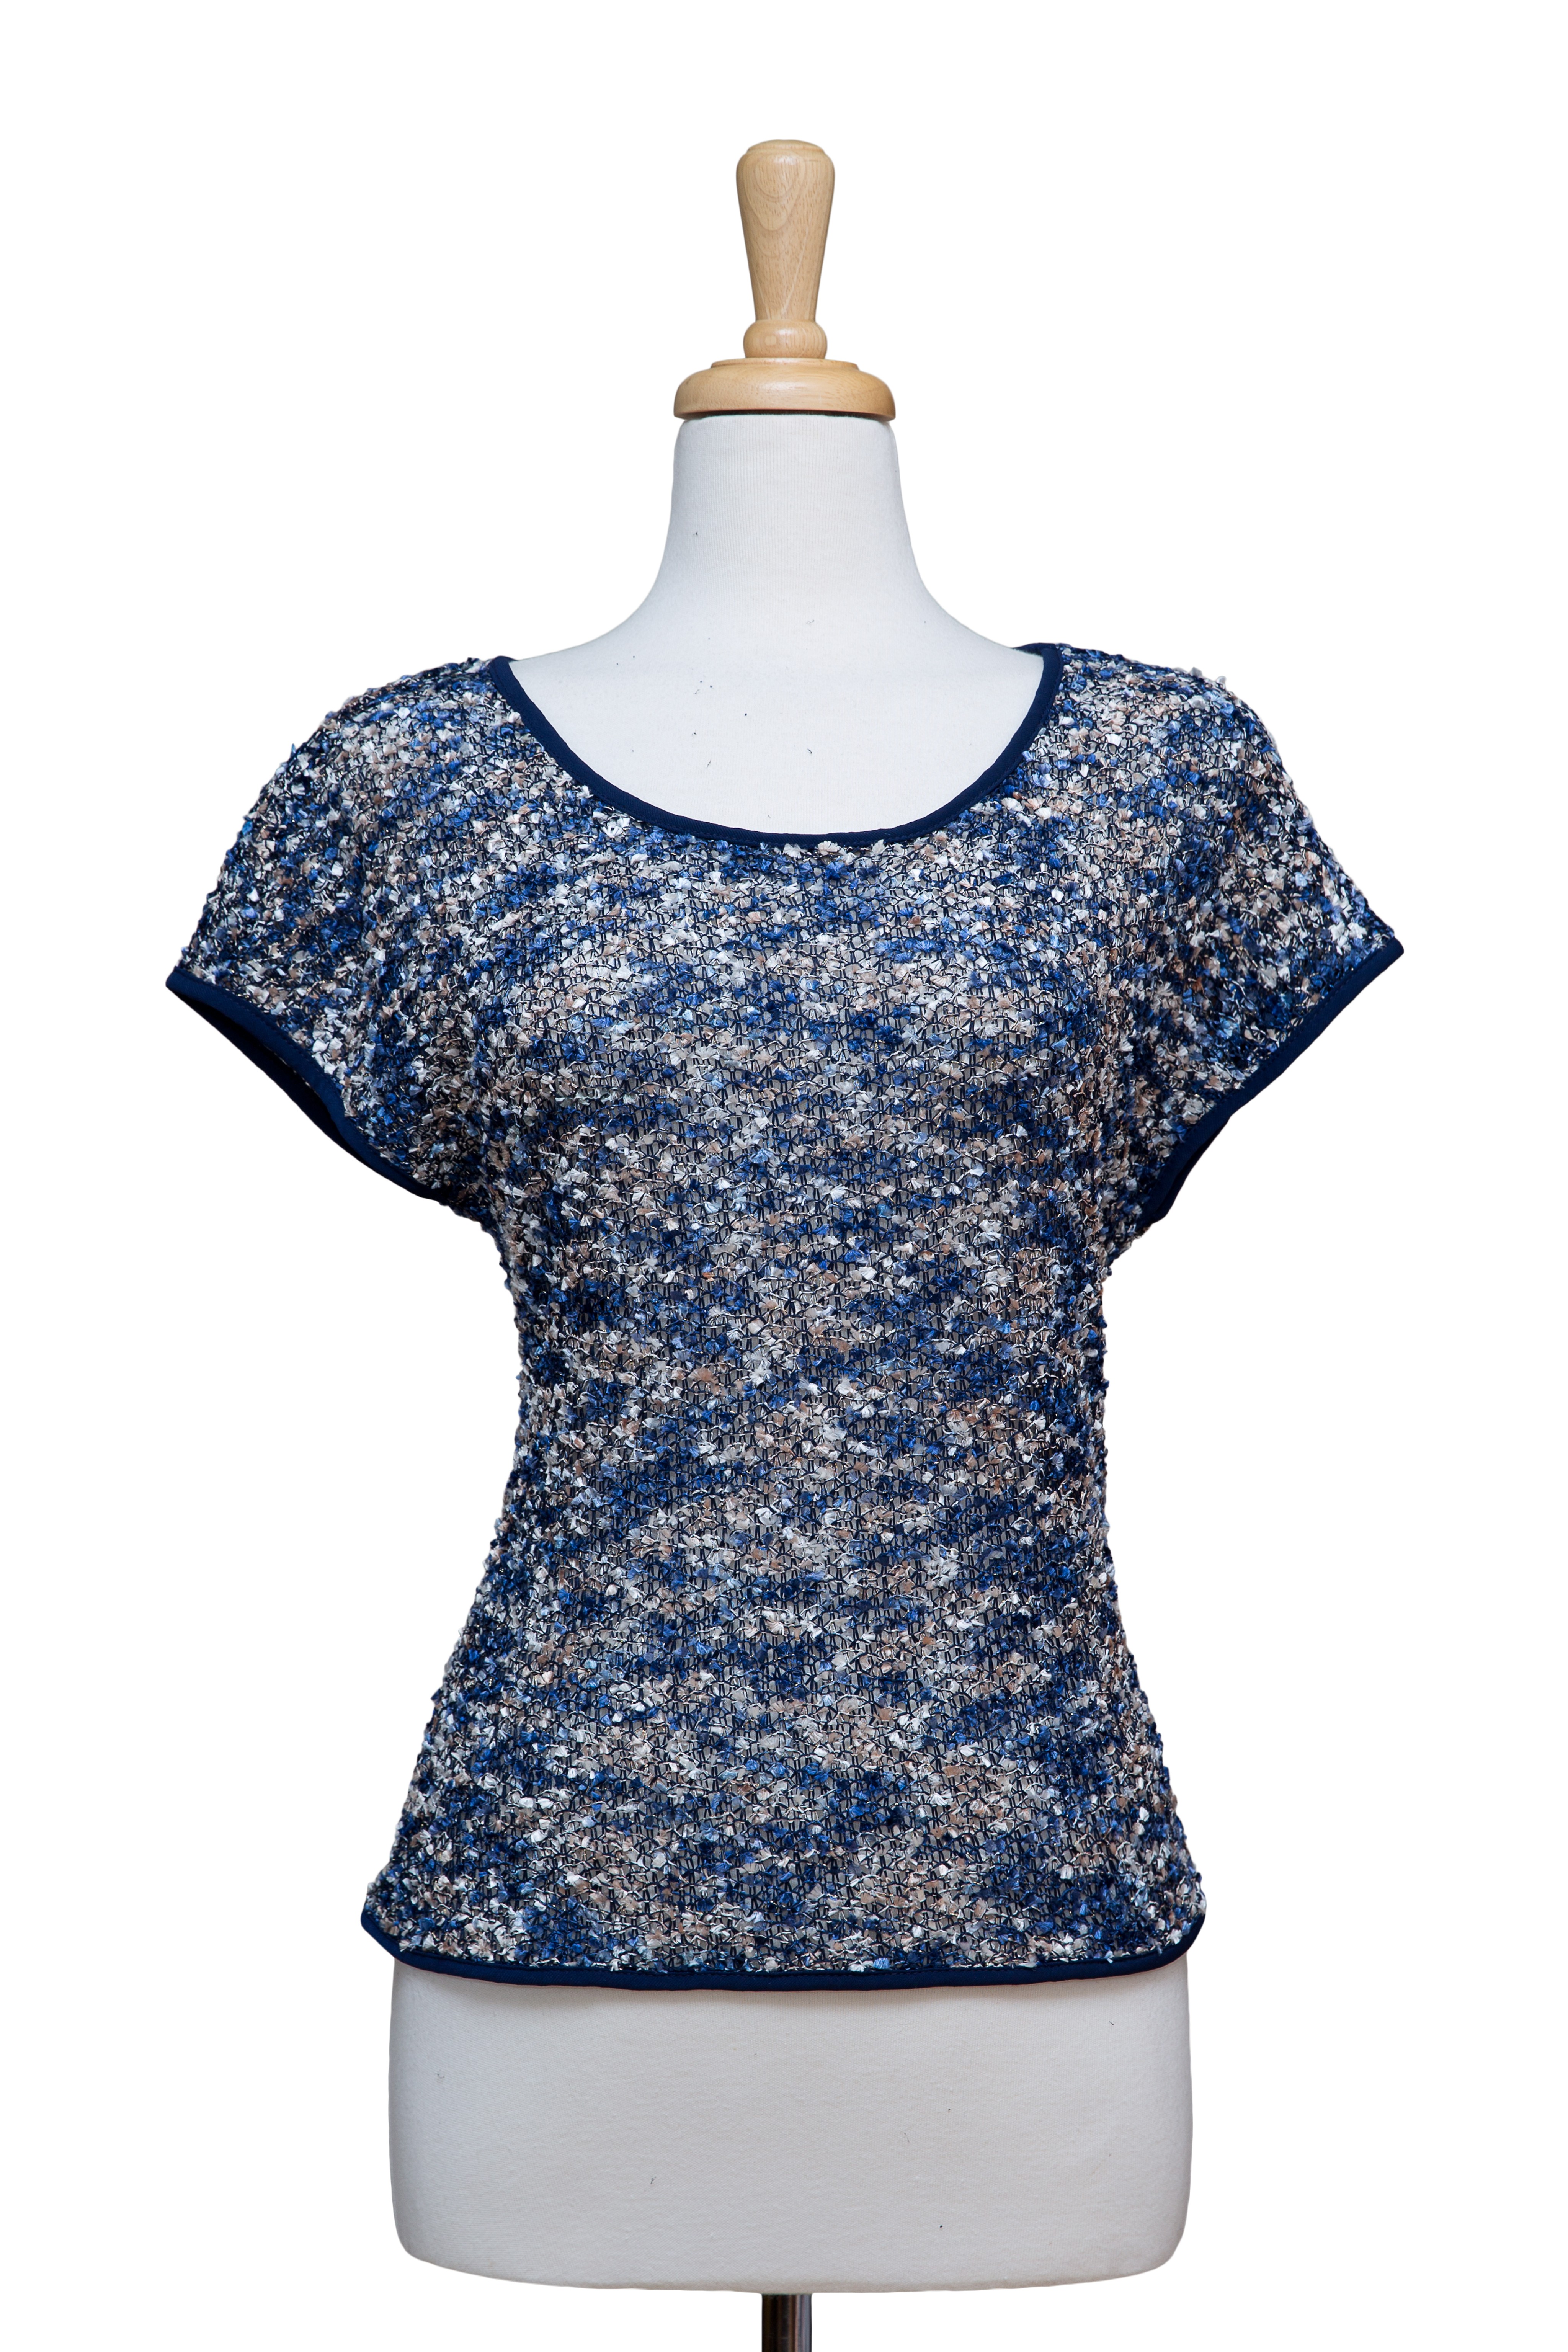 Shades of Blue & Ivory Tweed Knit Short Sleeve Top